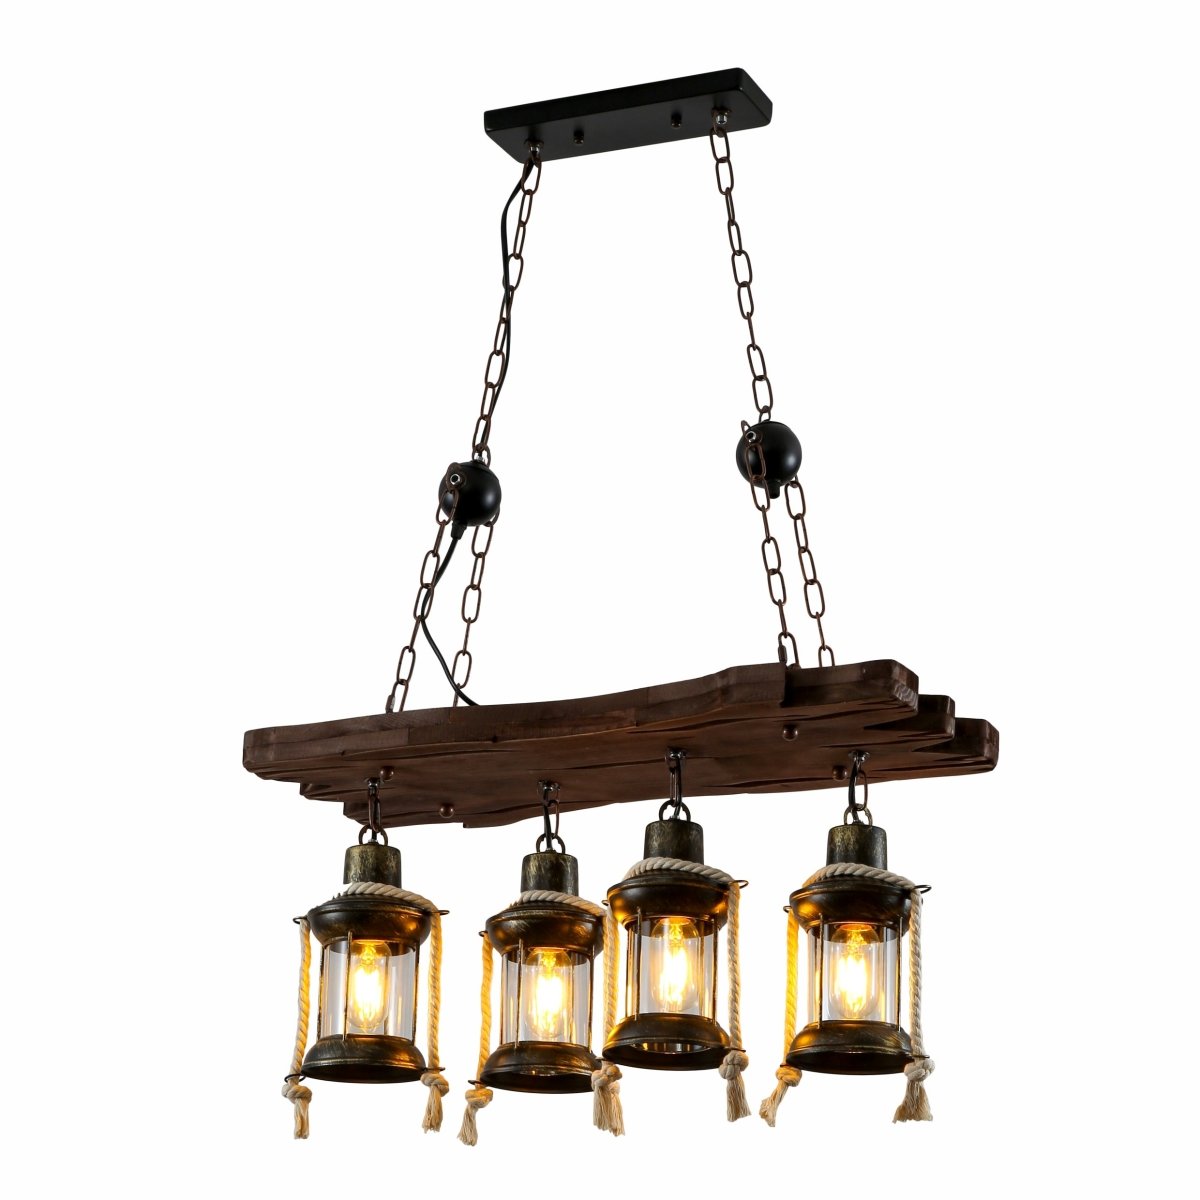 Main image of Board Iron and Wood Glass Cylinder Shade Island Chandelier Light 4xE27 | TEKLED 159-17852